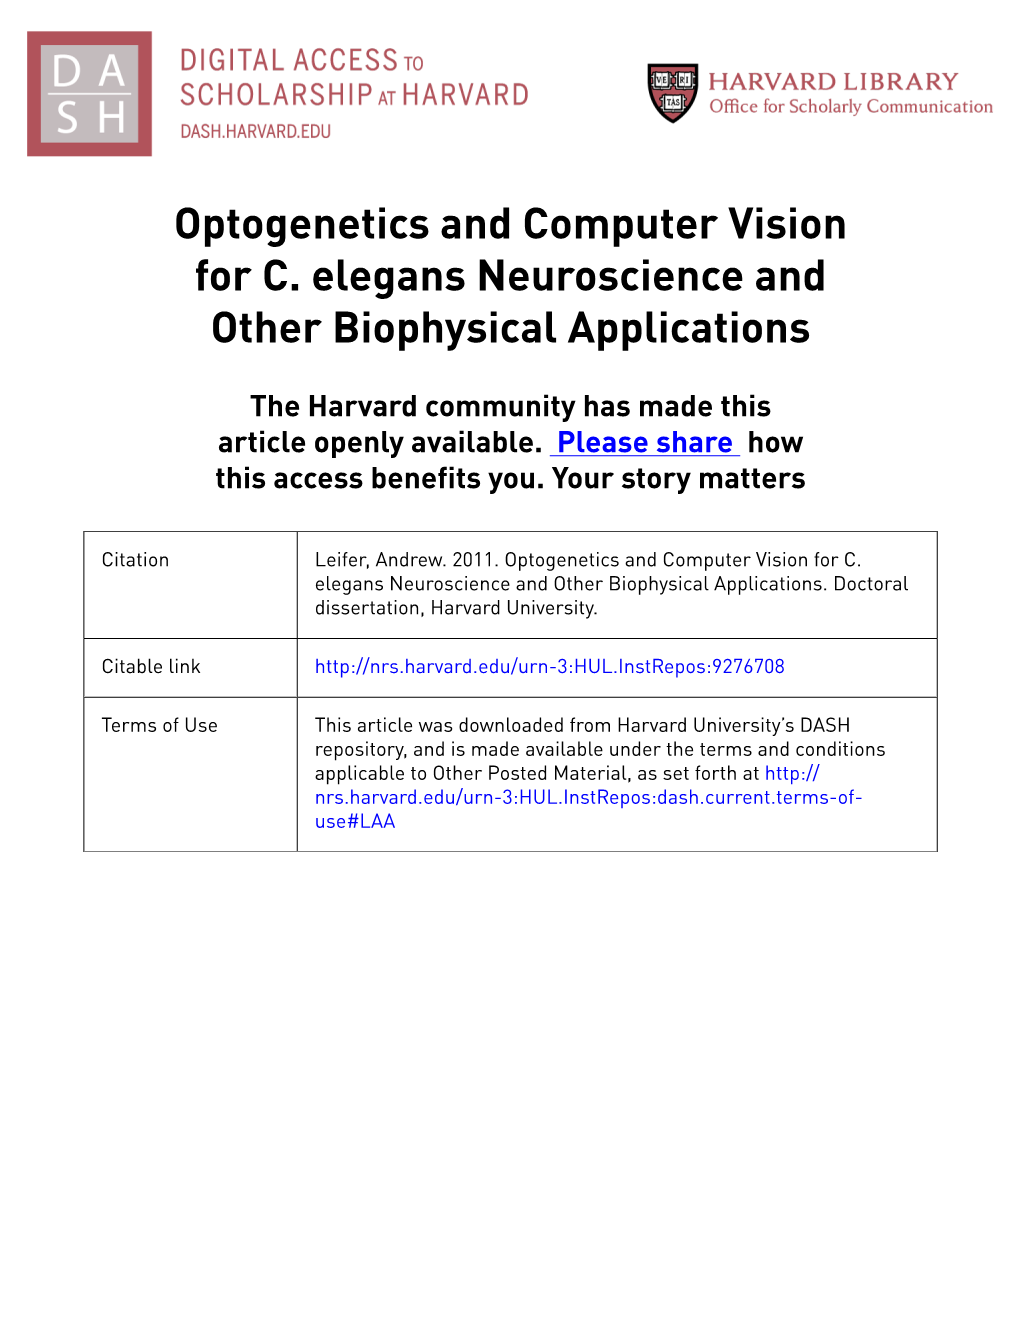 C. Elegans Neuroscience and Other Biophysical Applications